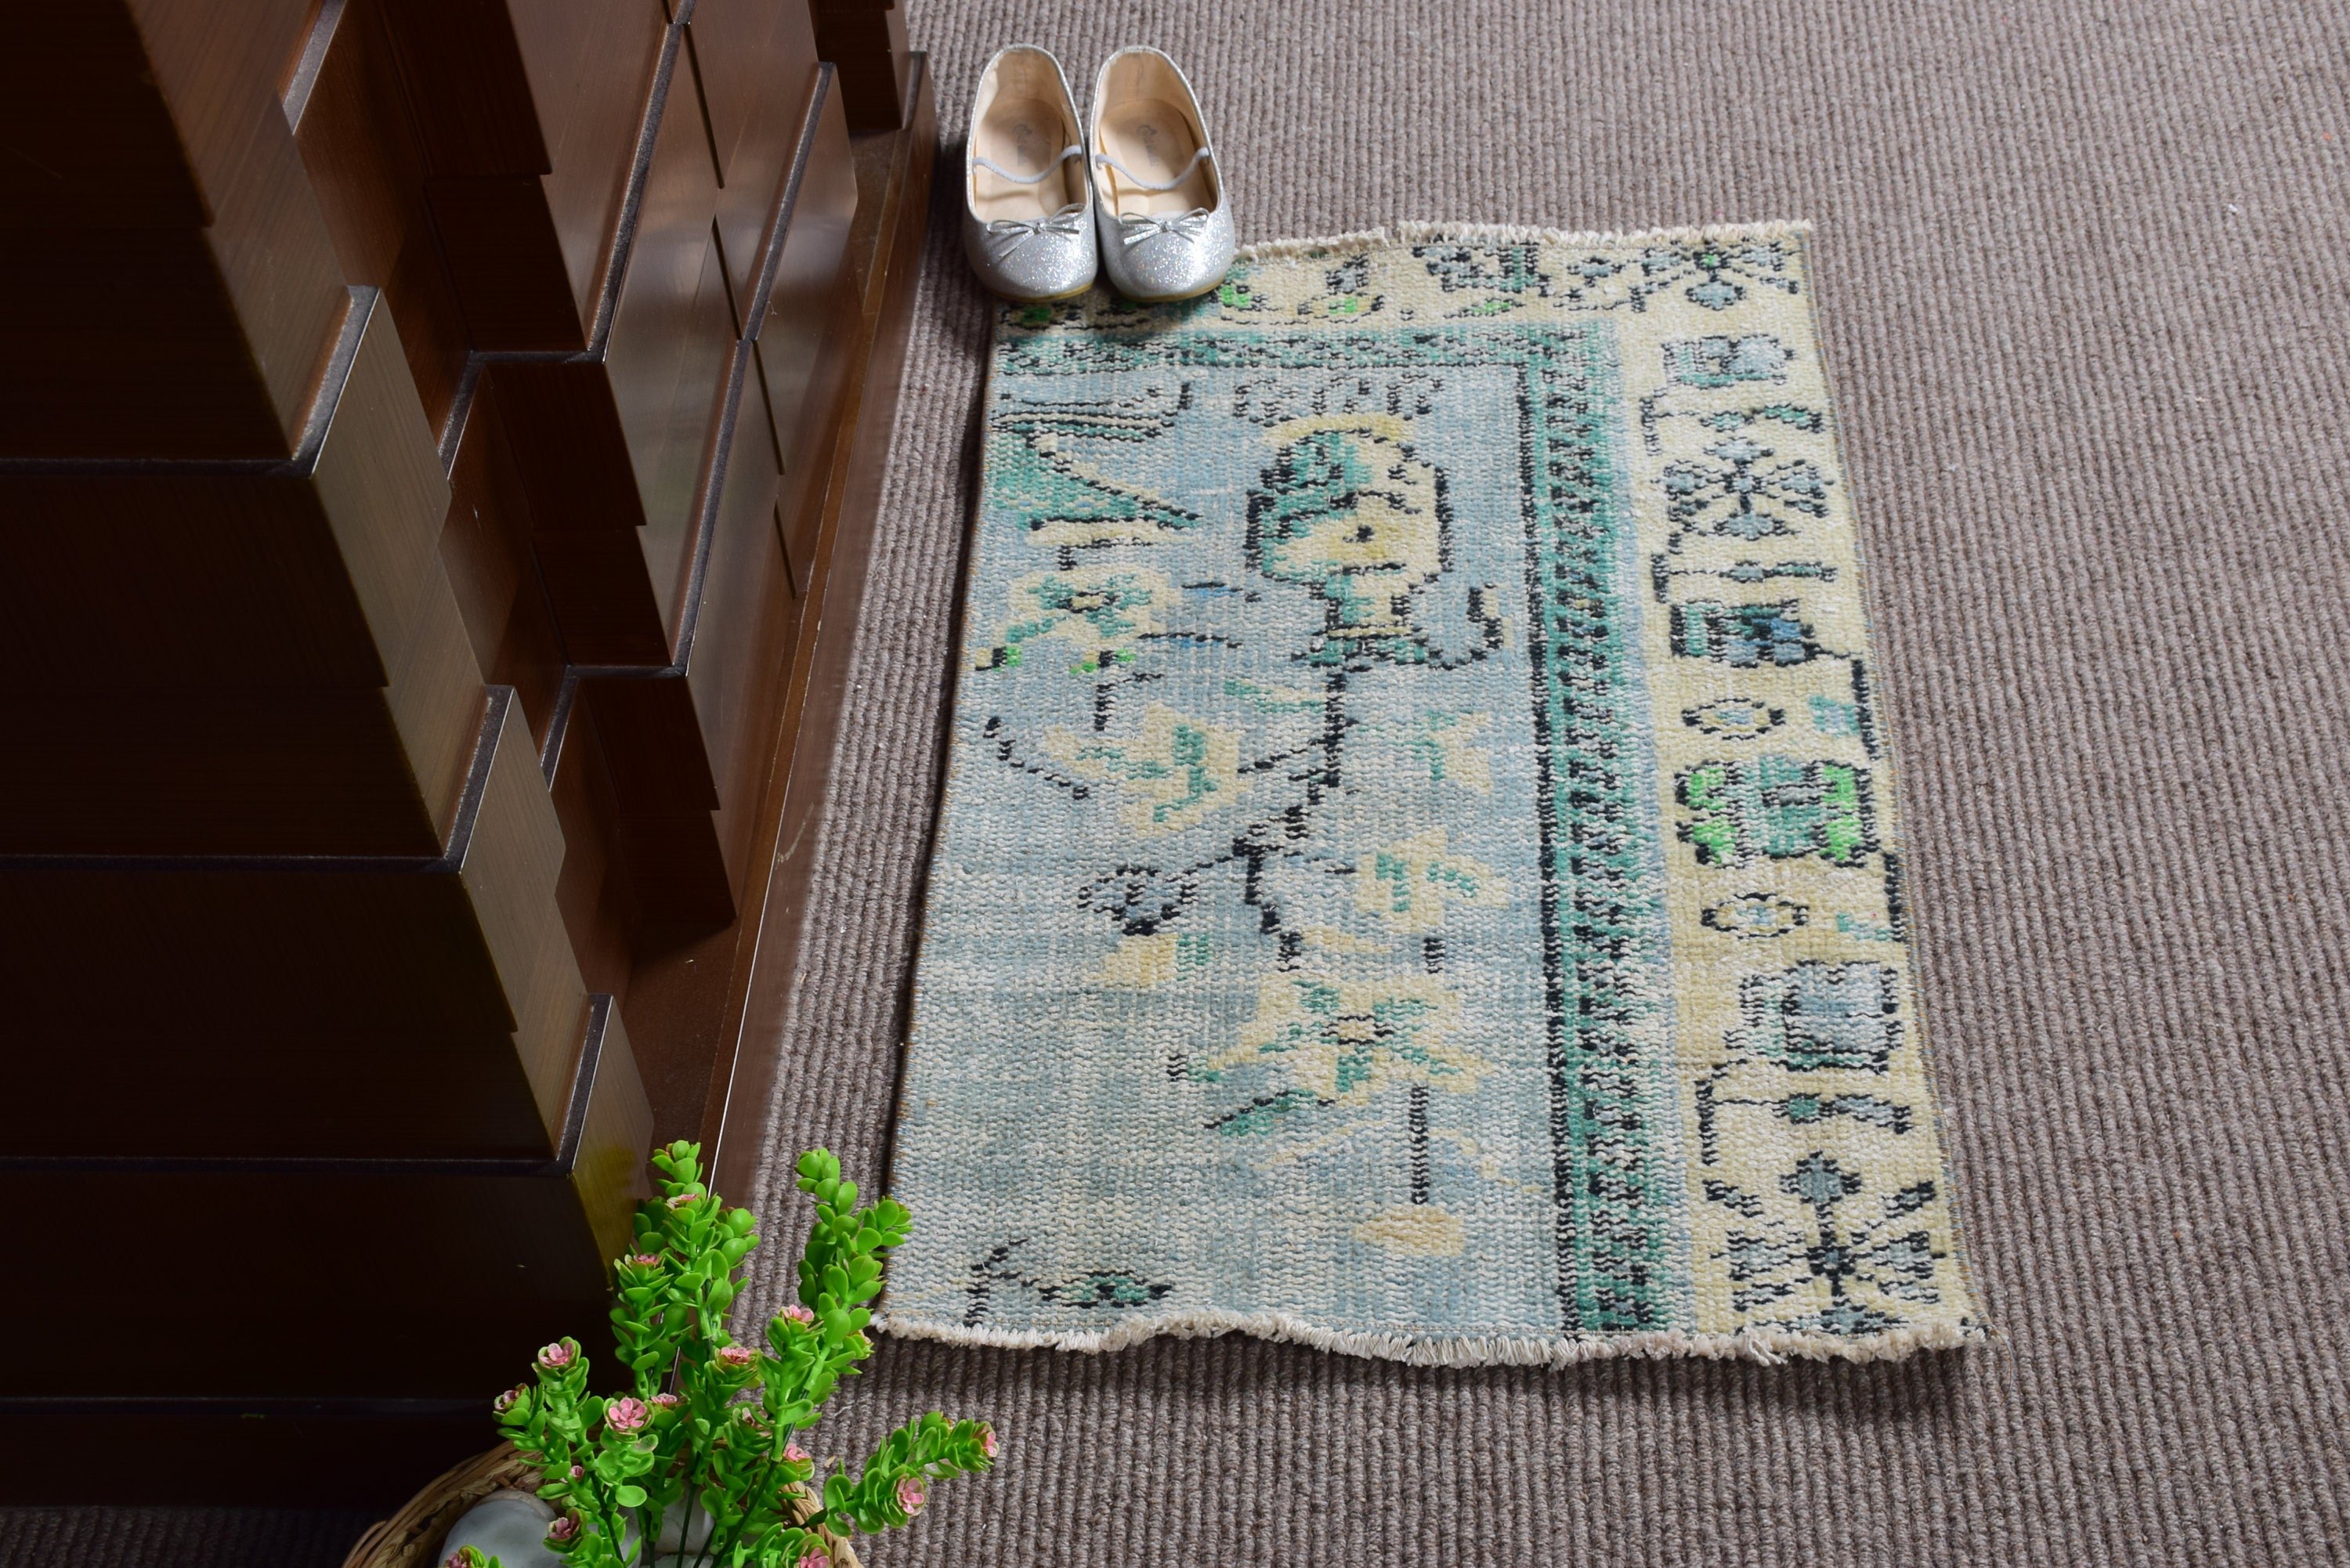 Car Mat Rug, Vintage Rugs, Oushak Rug, Moroccan Rug, Green Antique Rugs, Rugs for Nursery, Entry Rugs, Turkish Rugs, 1.6x2.6 ft Small Rugs